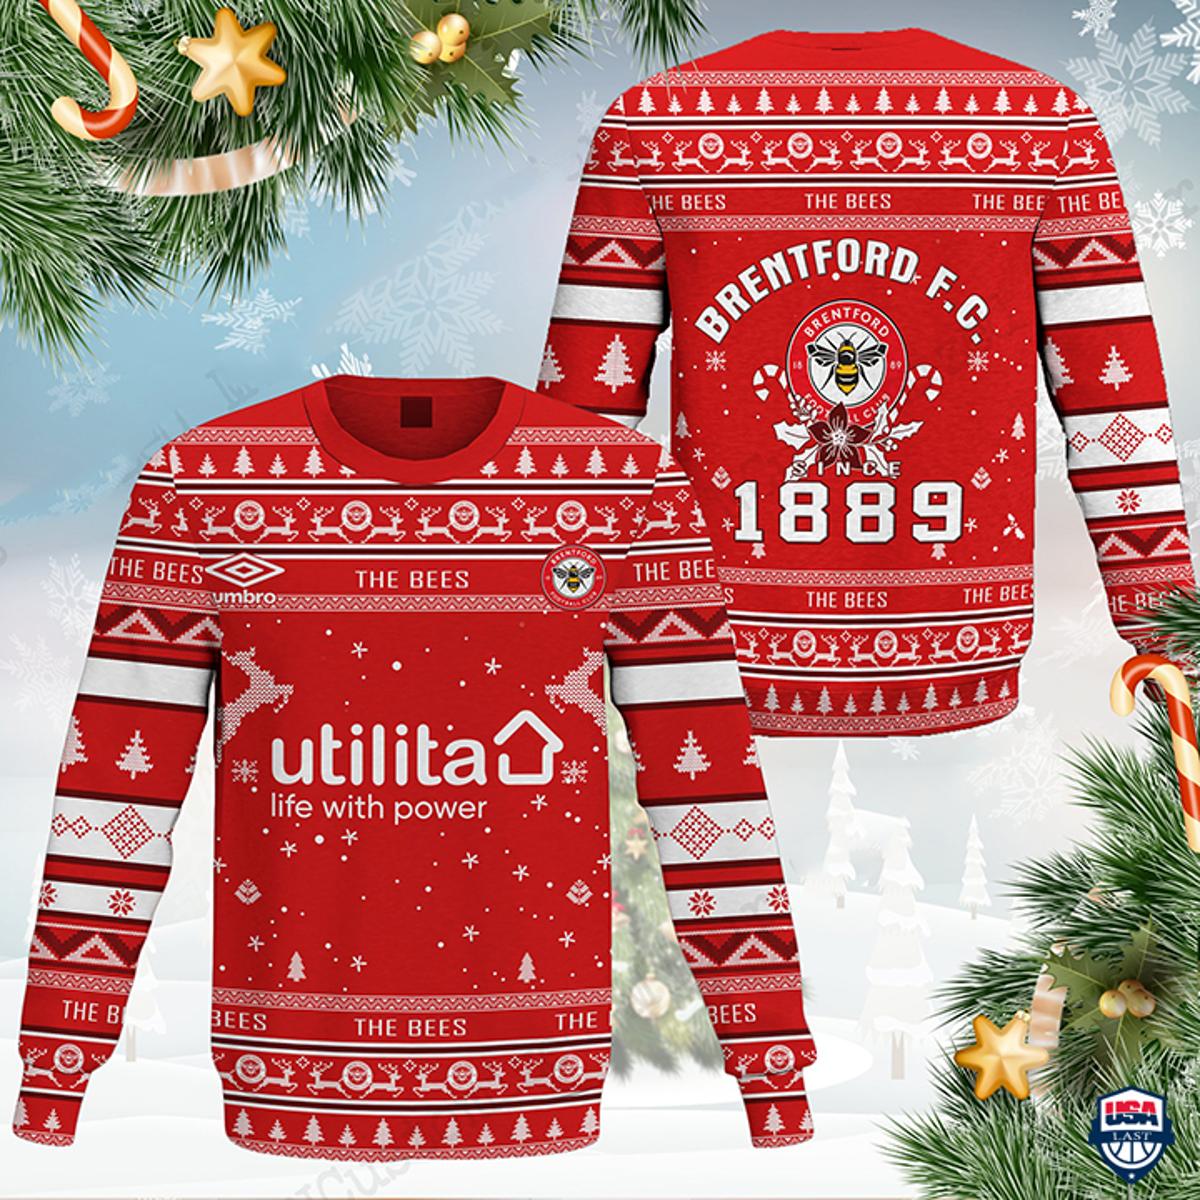 Brentford Fc 1889 Ugly Christmas Sweater For Fans